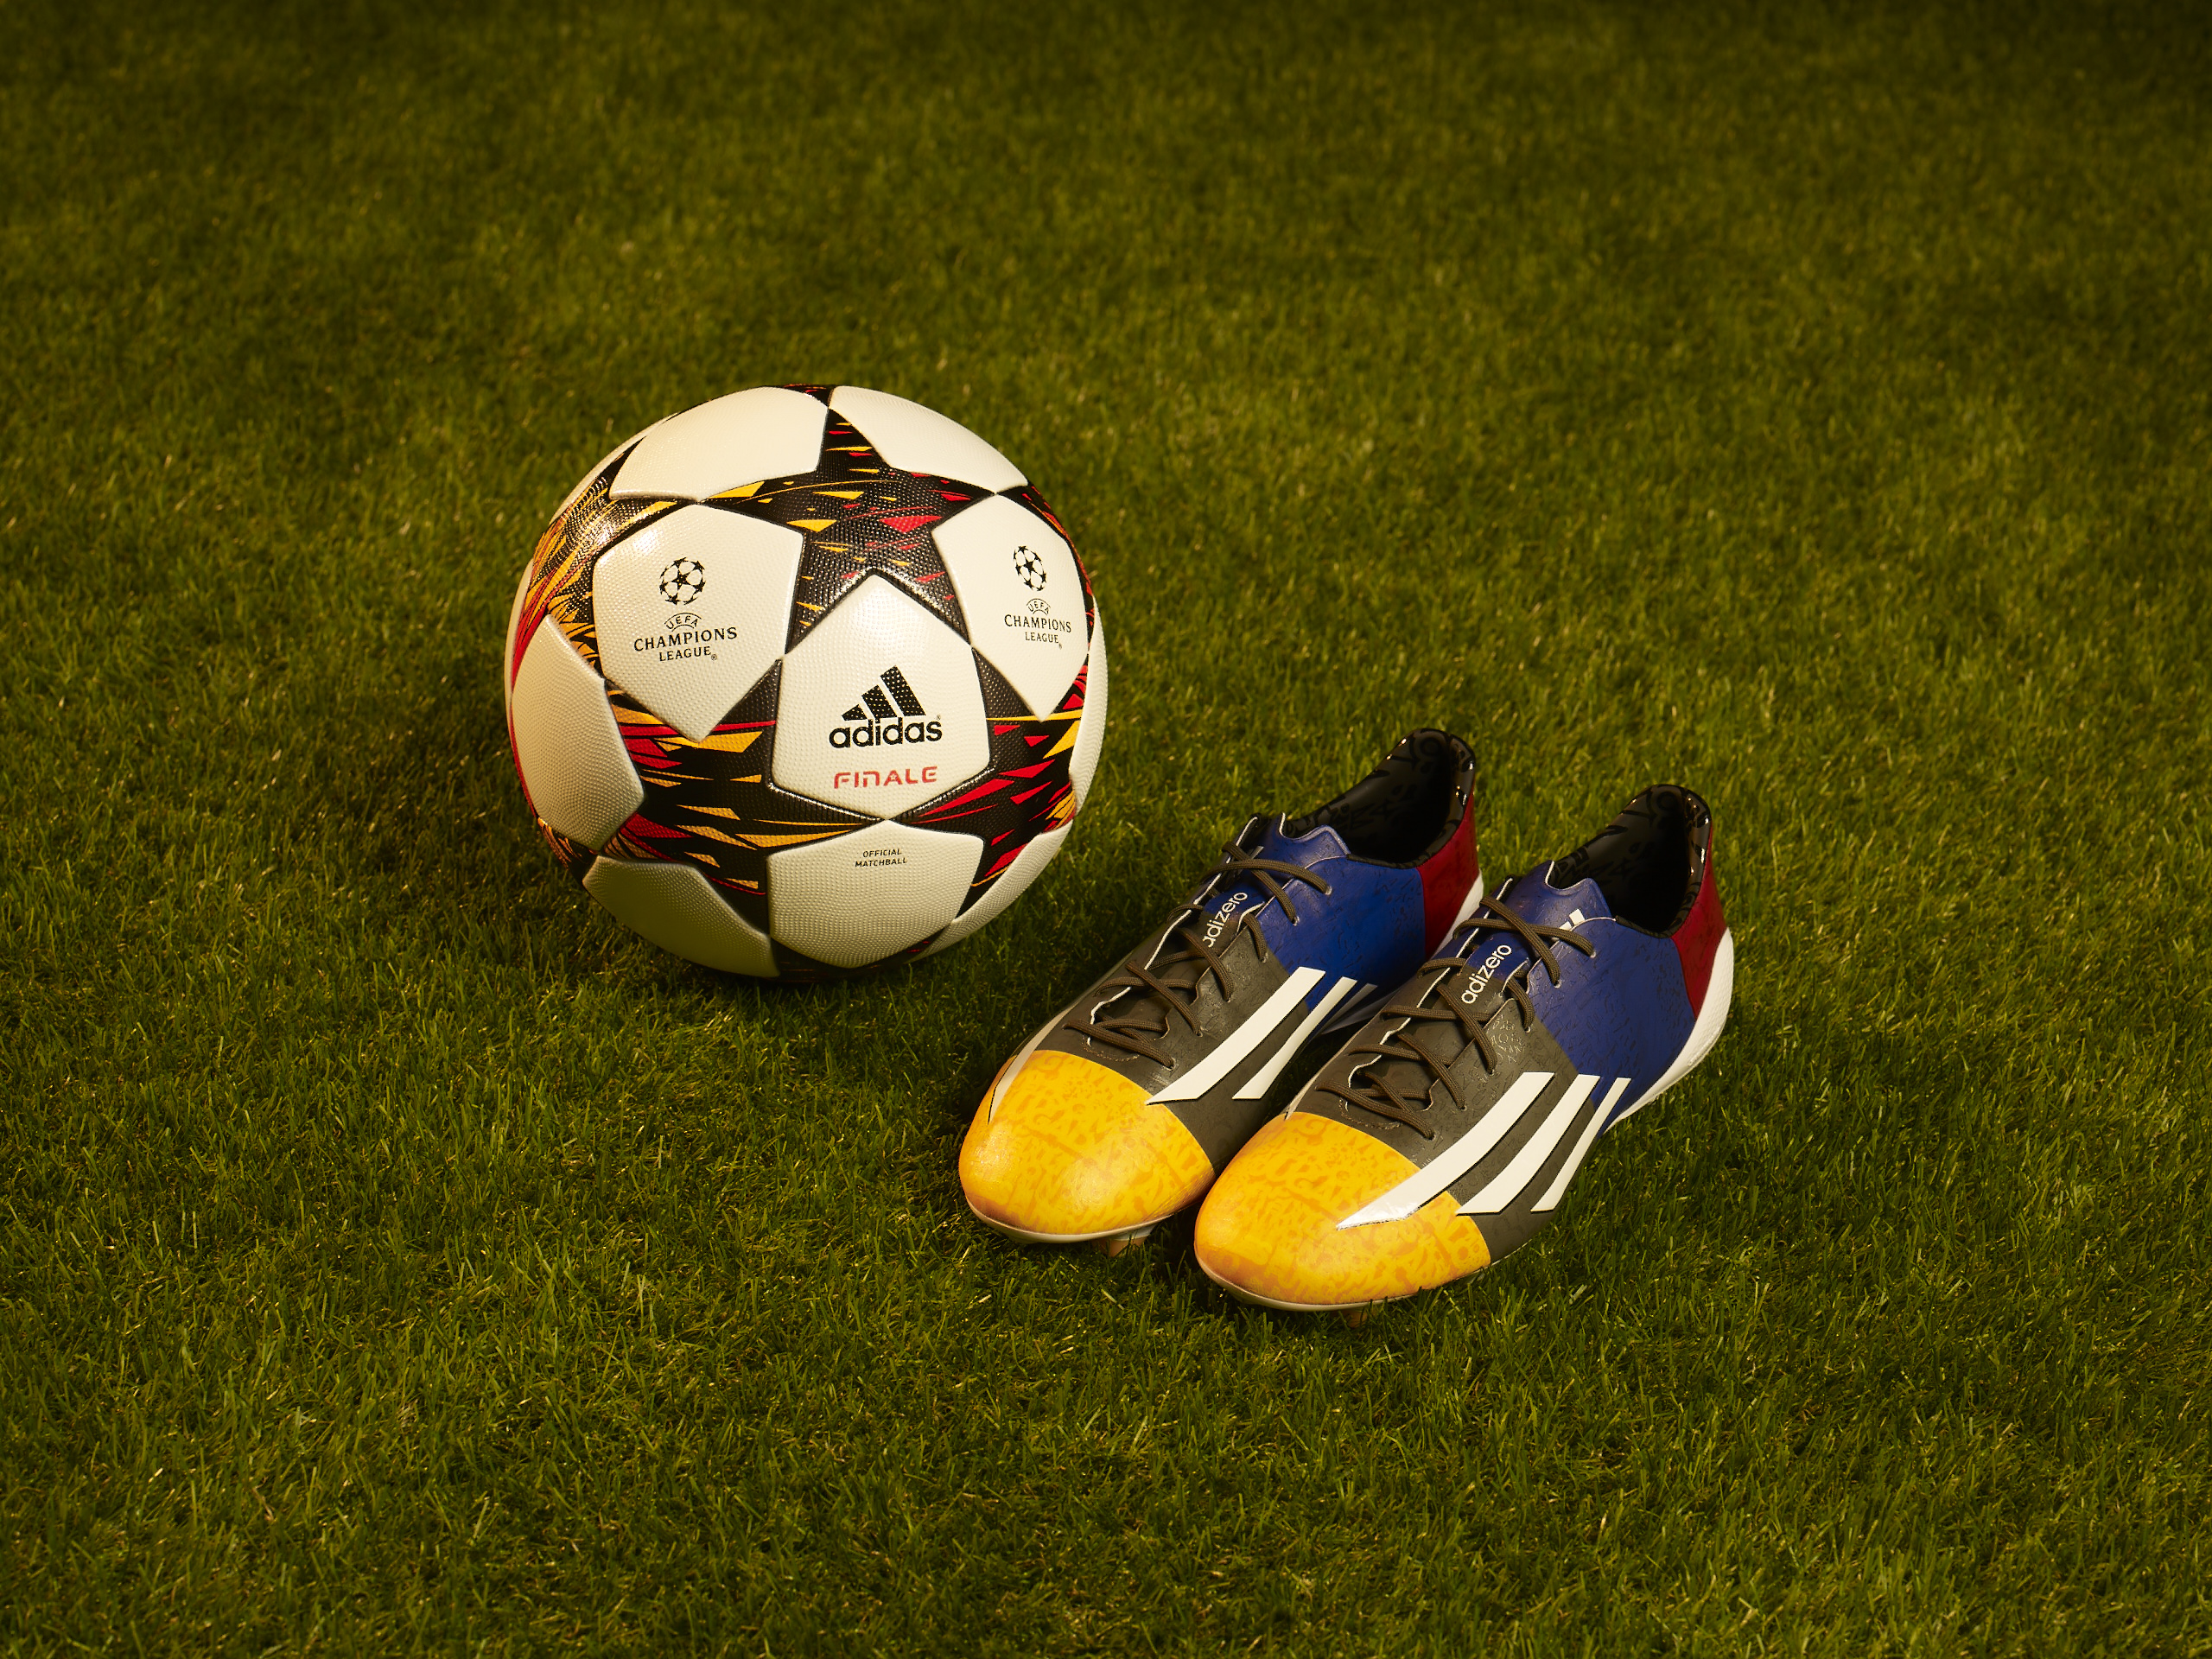 Introducing The New Adidas Messi Uefa Champions League